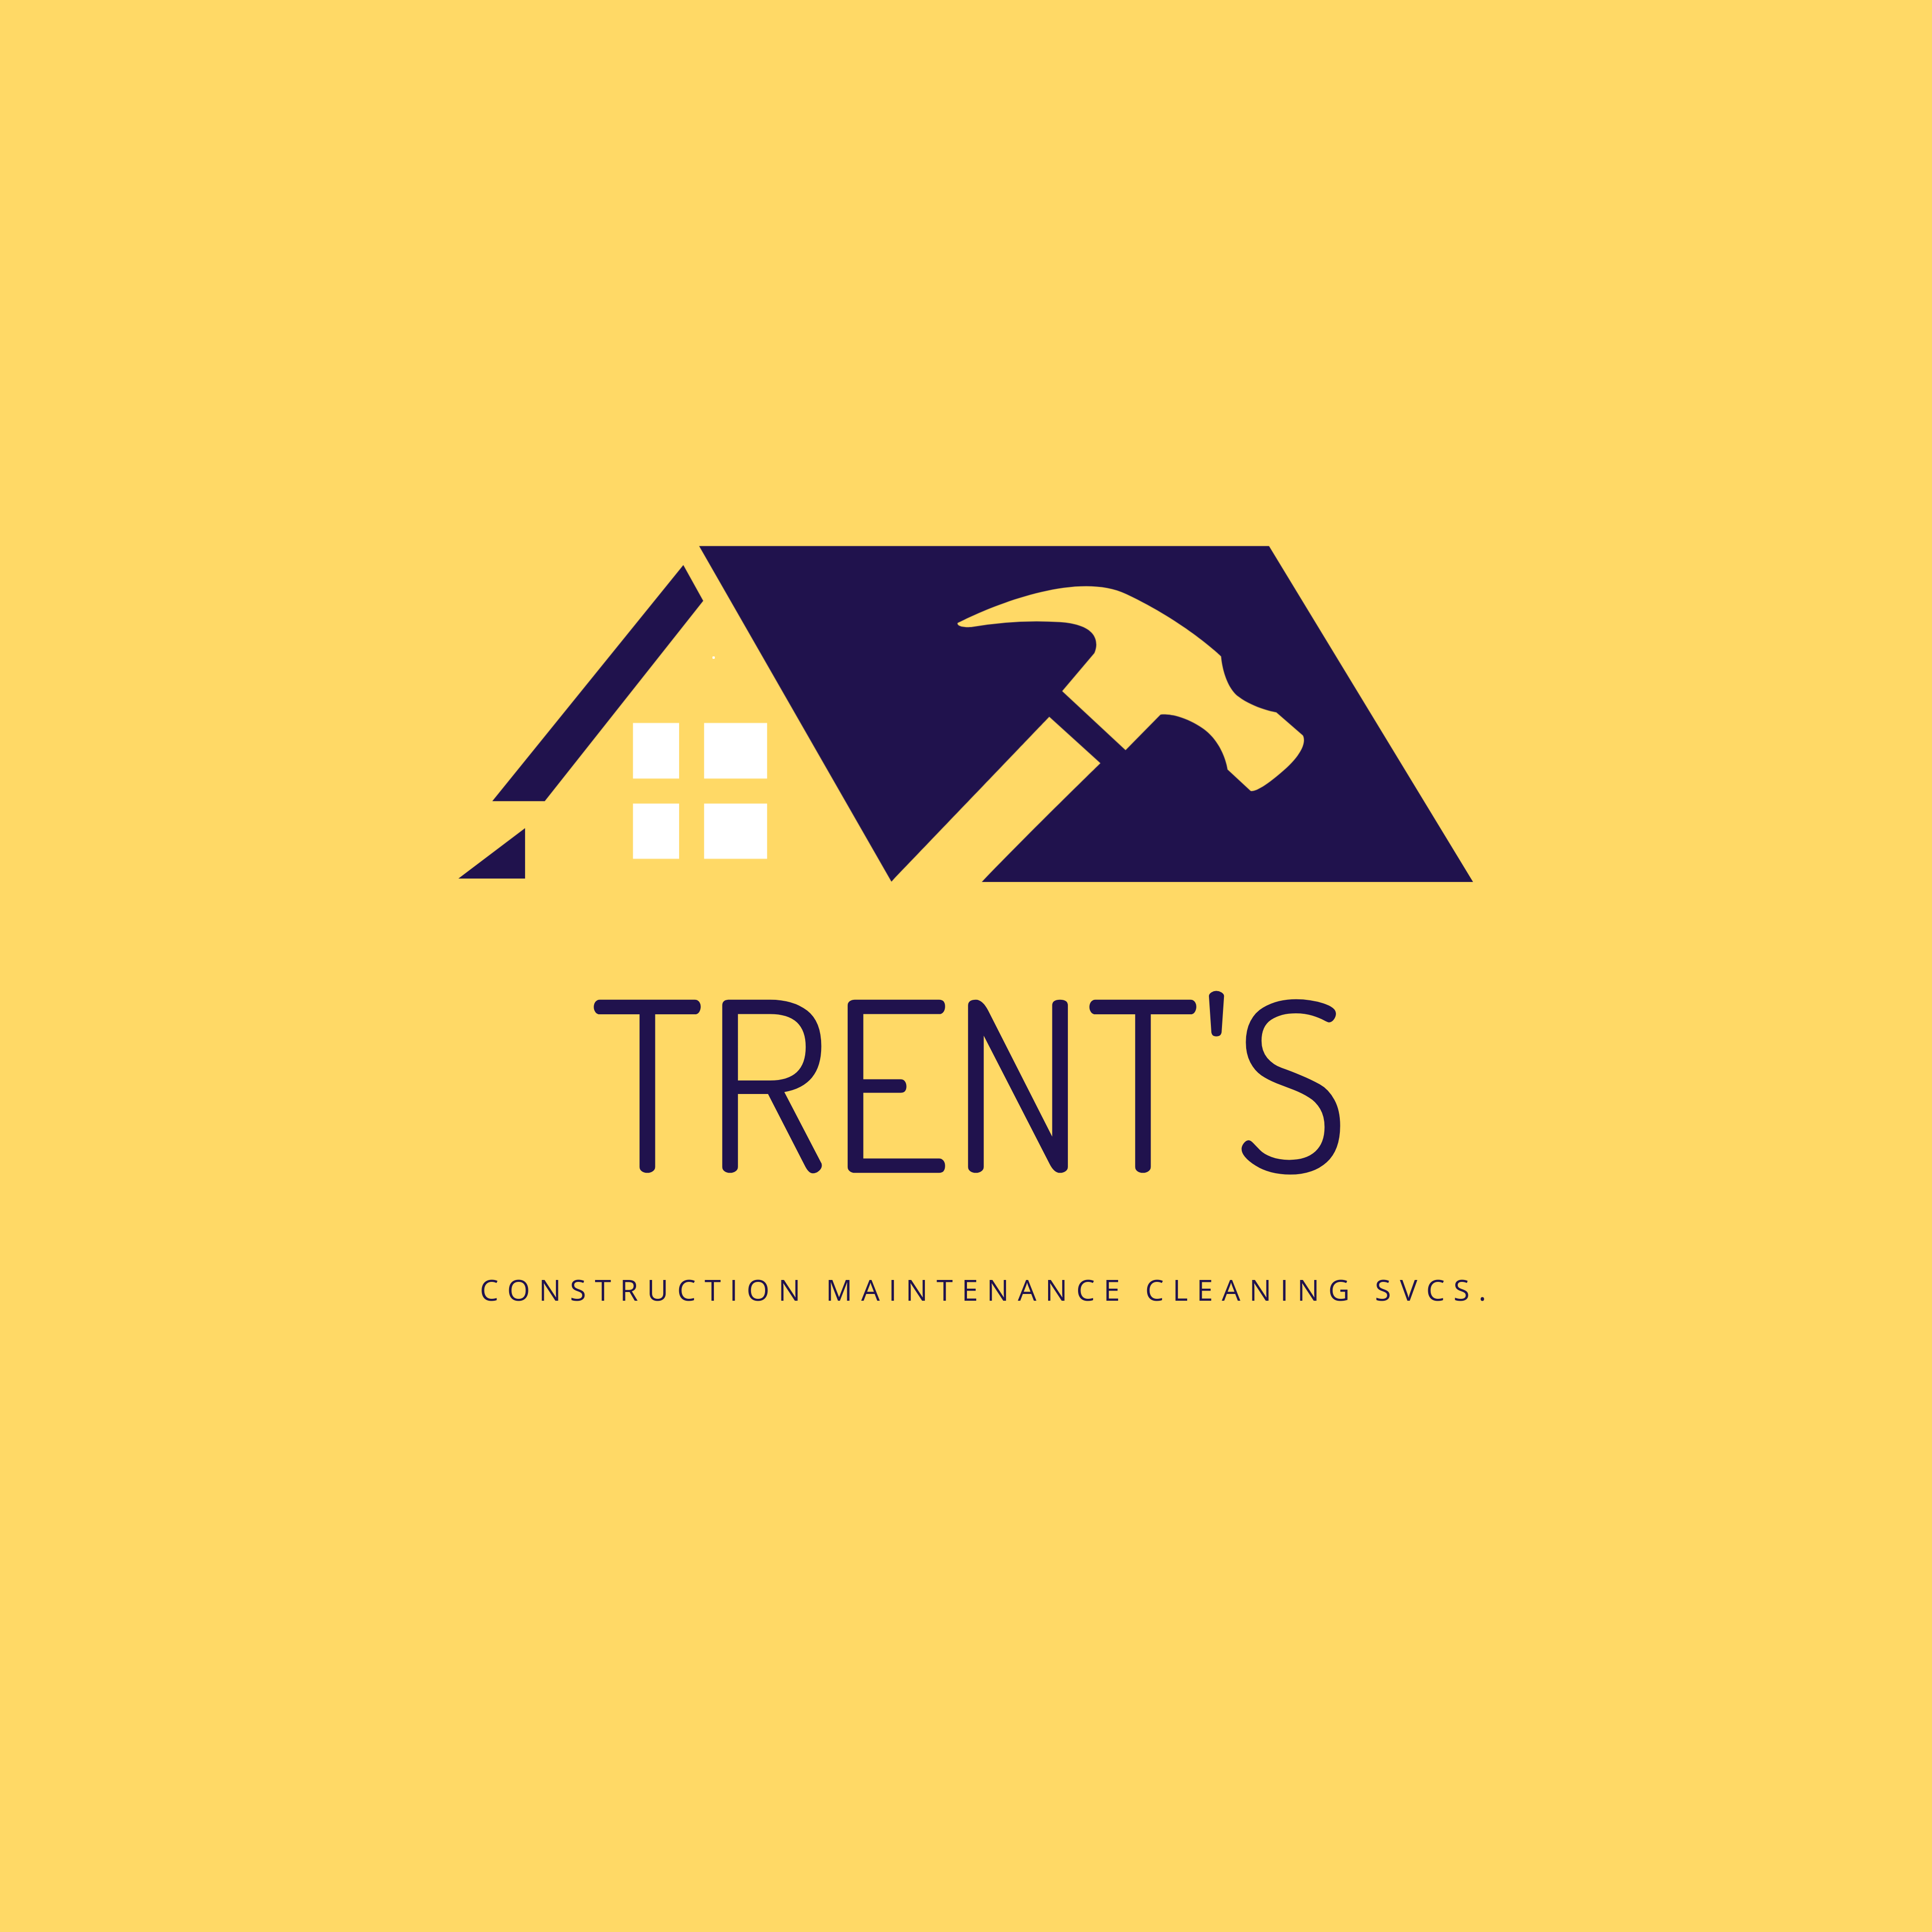 Trent's Construction, Maintenance and Cleaning Logo